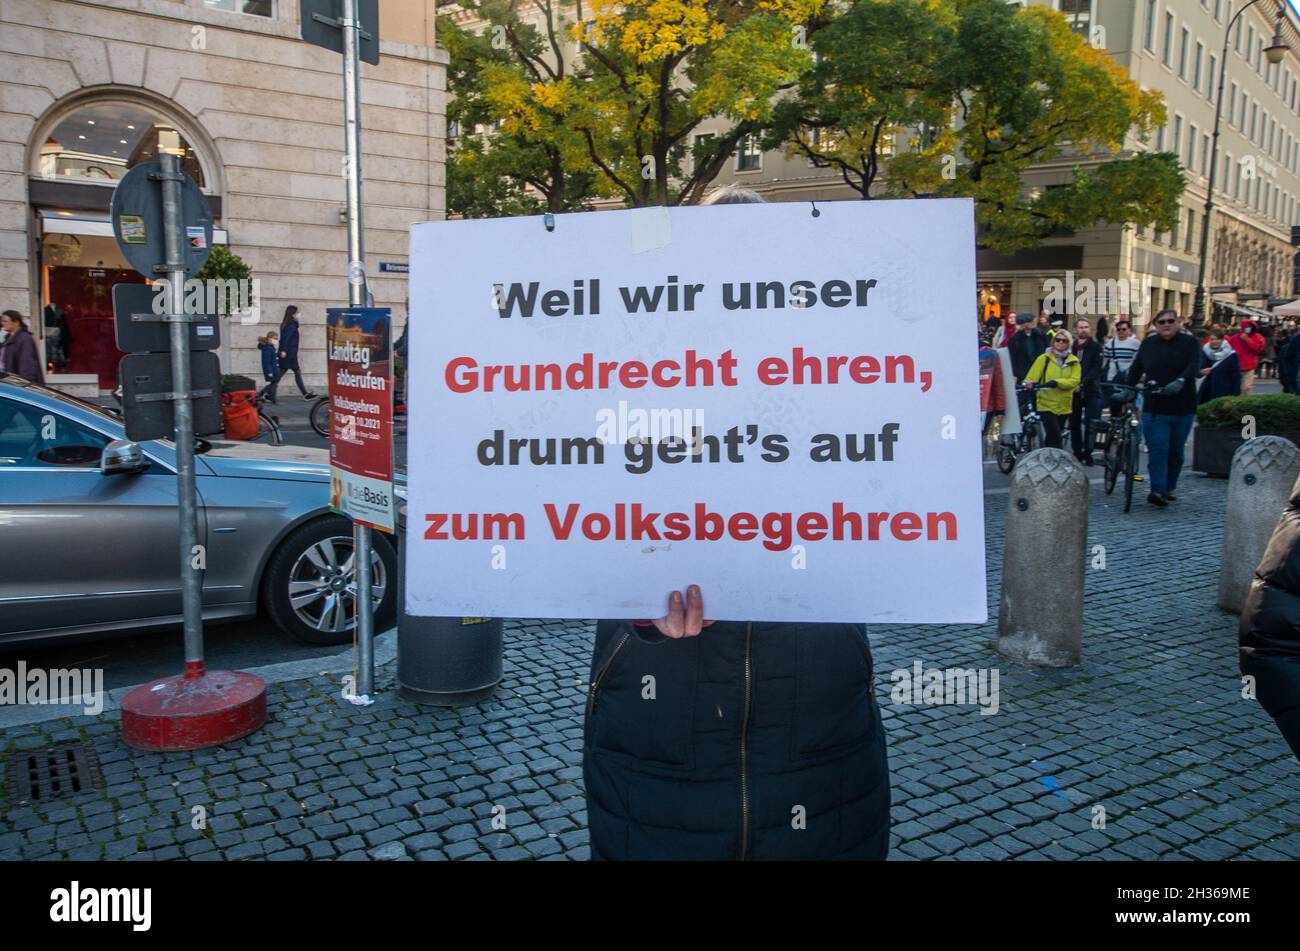 Munich, Bavaria, Germany. 23rd Oct, 2021. Signs and supporters of the Volksbegehren Landtag Abberufen (initiative to recall the Bavarian Parliament) during an anti-mask, Corona denier demonstration. The composition and leadership of the initiative includes Querdenker, QAnons, die Basis, neonazis, Reichsbuerger (sovereign citizens), and known conspiracy theorists and wellness advocates. The goal is to topple the Bavarian government and install their own, presumably far-right, sovereign citizen government in its place. Thus far, the initiative in stage 2 has failed to receive much resonance Stock Photo